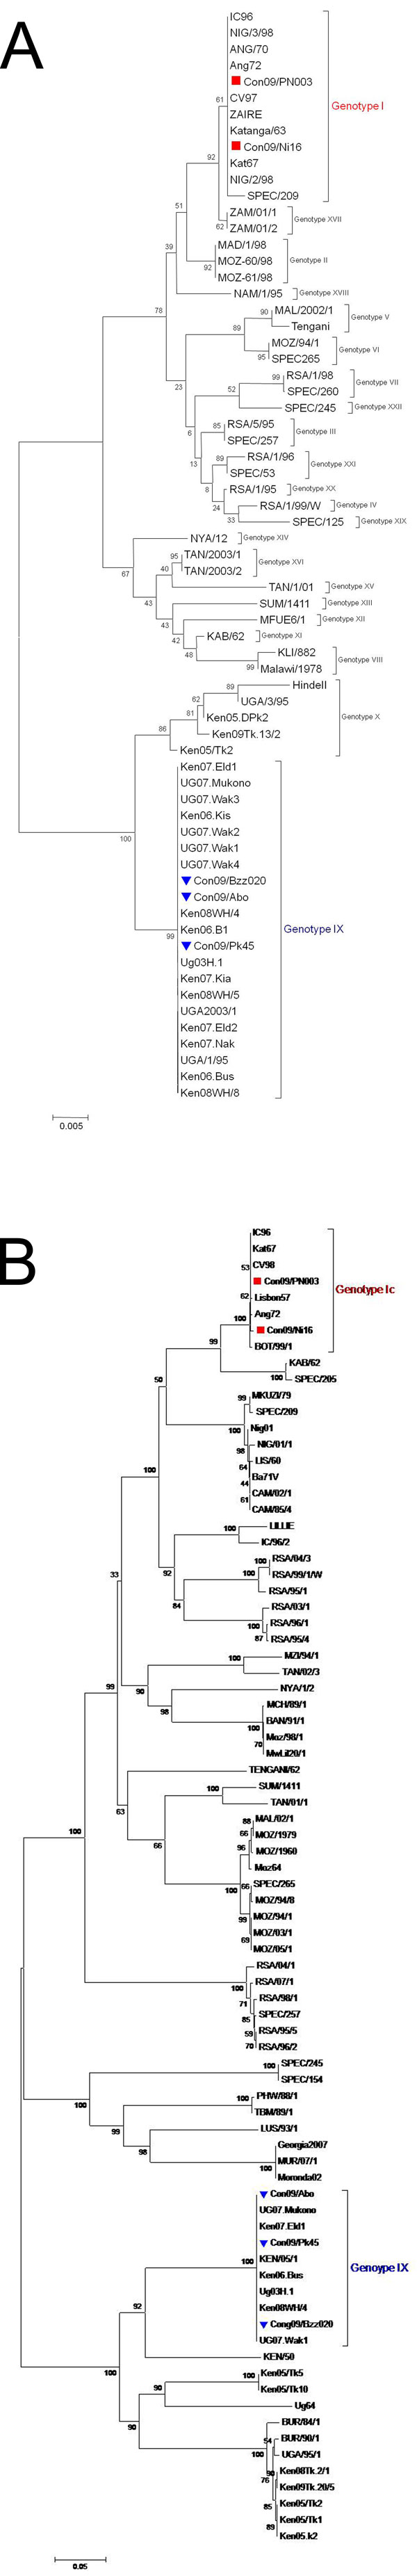 Minimum-evolution (ME) phylogenetic trees of 5 isolates from Republic of the Congo, 2009, based on C-terminal end of the p72 protein relative to the 22 p72 genotypes (labeled I–XXII) involved 6-nt sequences (A) and full length p54 gene sequences among 90 African swine fever virus (ASFV) isolates (B). The trees were inferred by using the ME method after initial application of a neighbor-joining algorithm. The percentage of replicate trees in which the associated taxa clustered by bootstrap analys